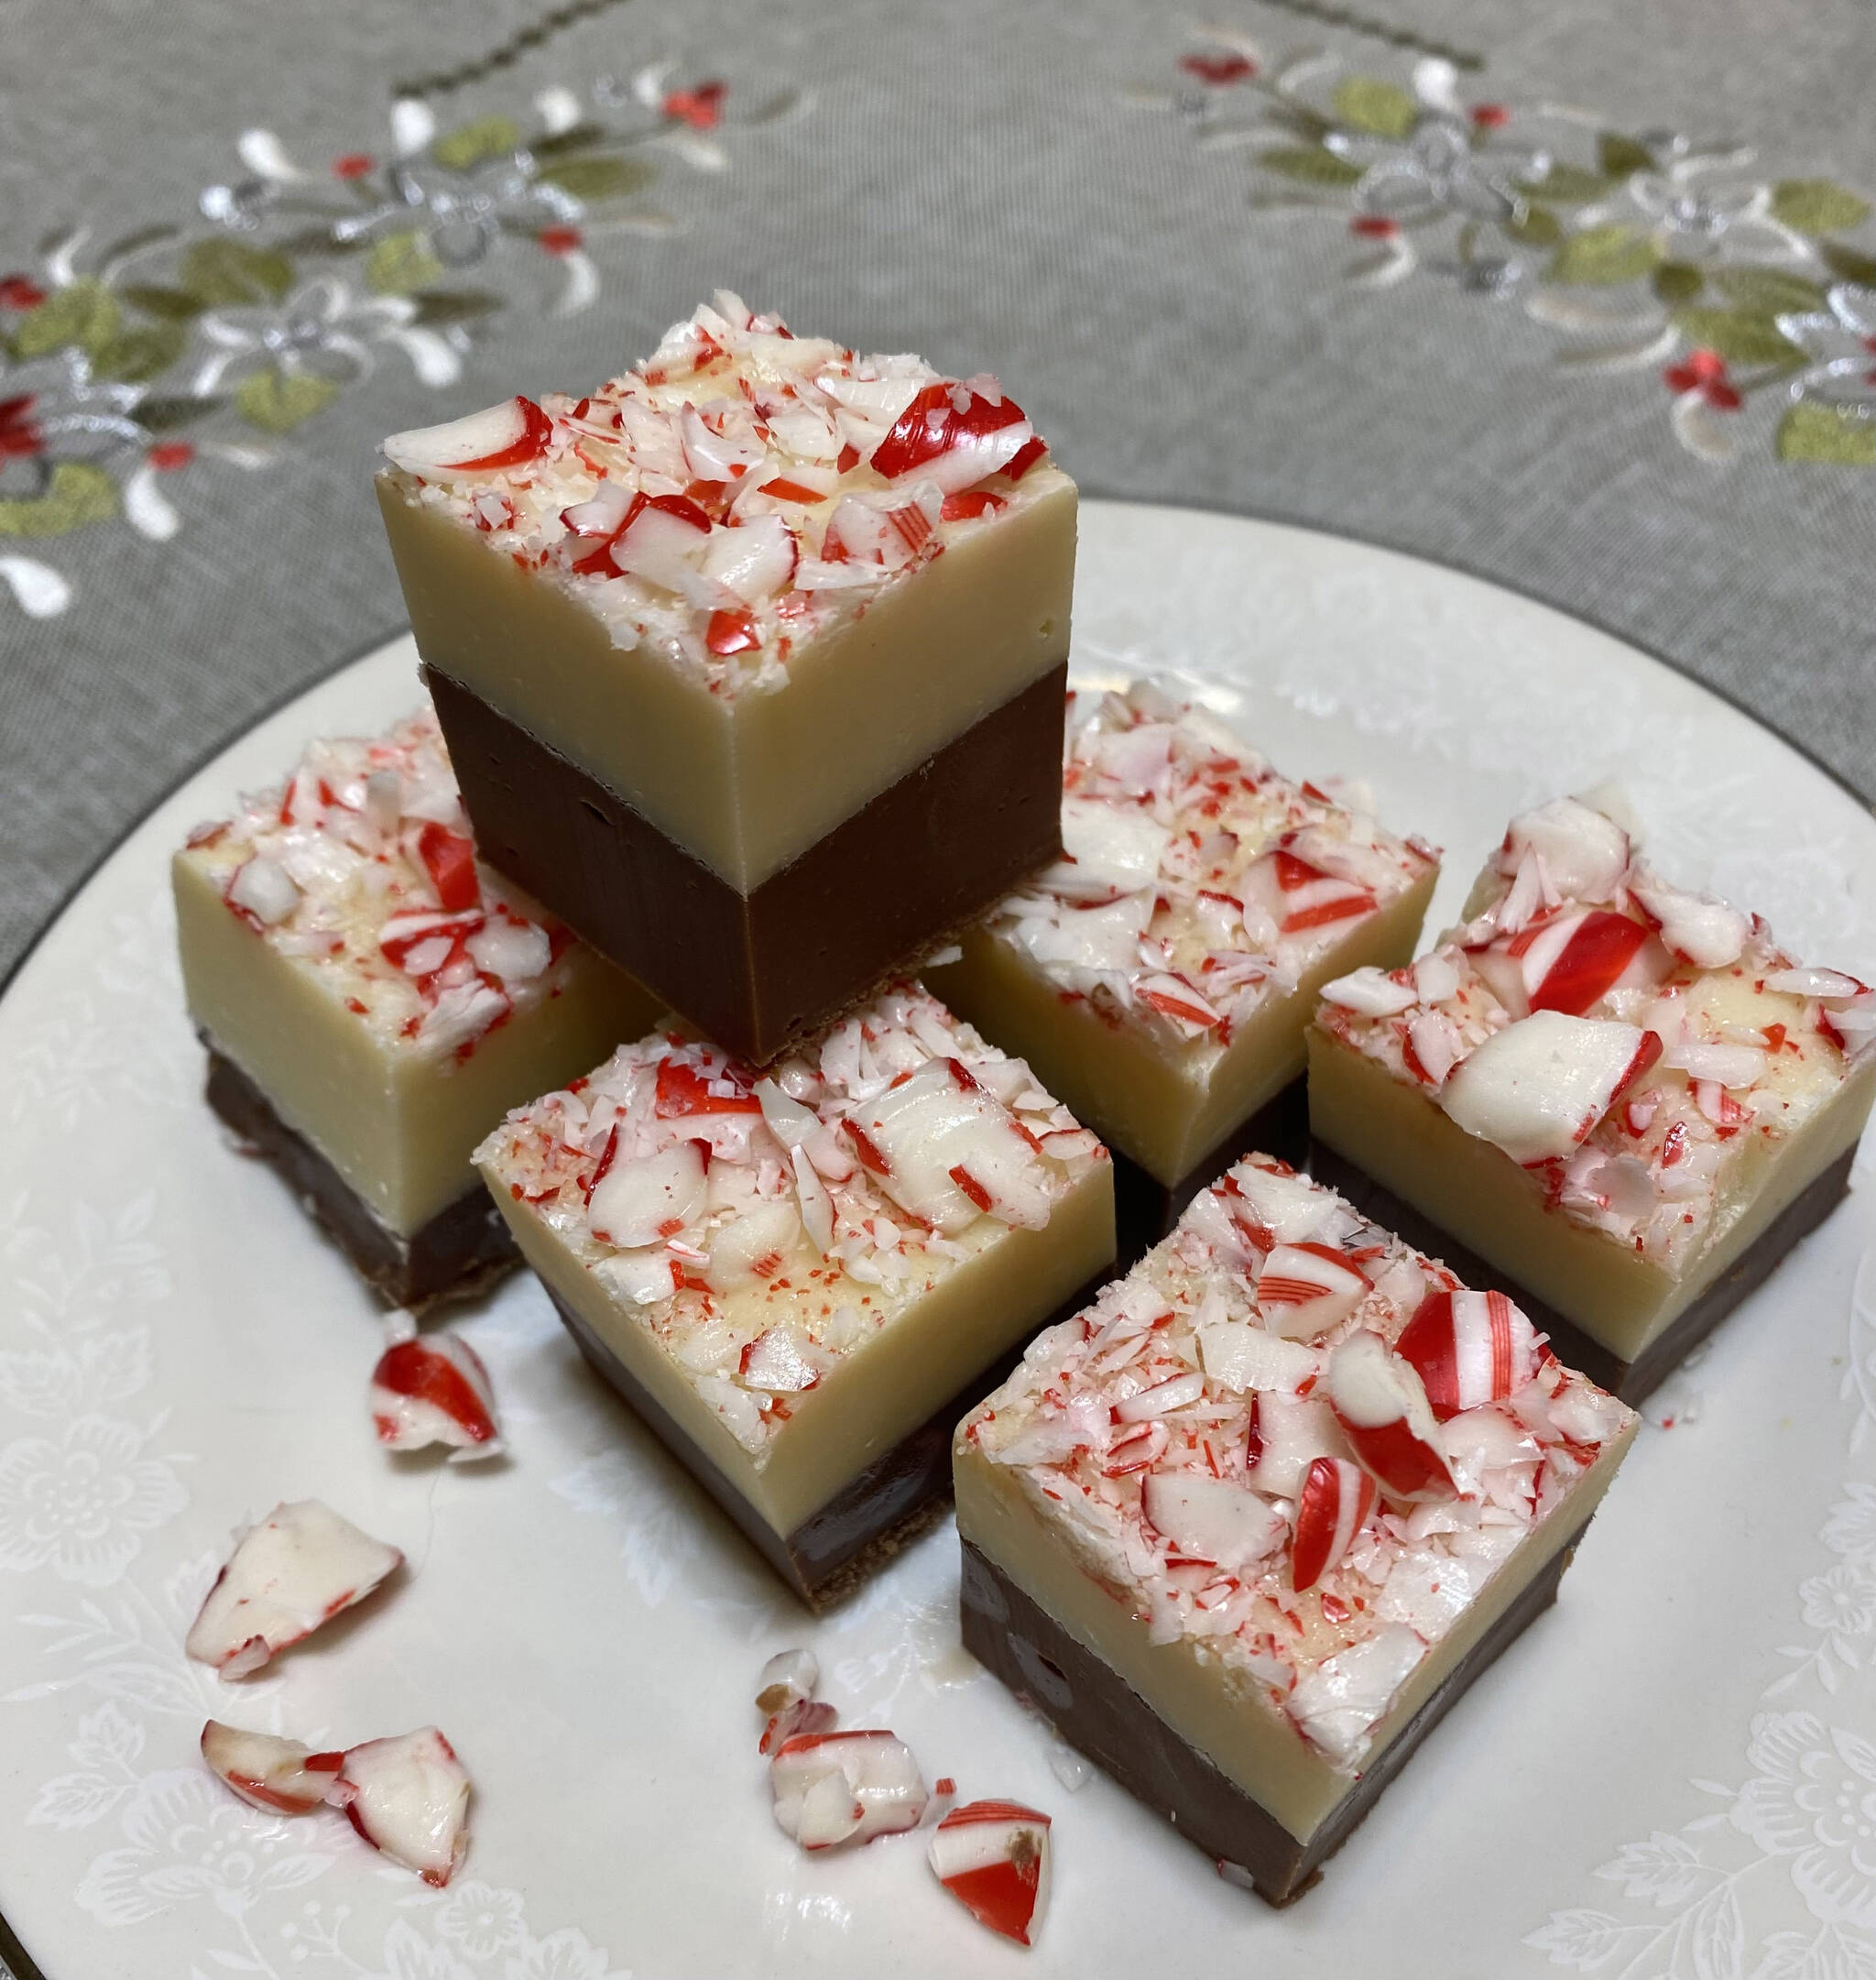 This Double Chocolate Peppermint Fudge combines chocolate chips, sweetened condensed milk and a few mix-ins for a simple, quick holiday treat. (Photo by Tressa Dale/Peninsula Clarion)